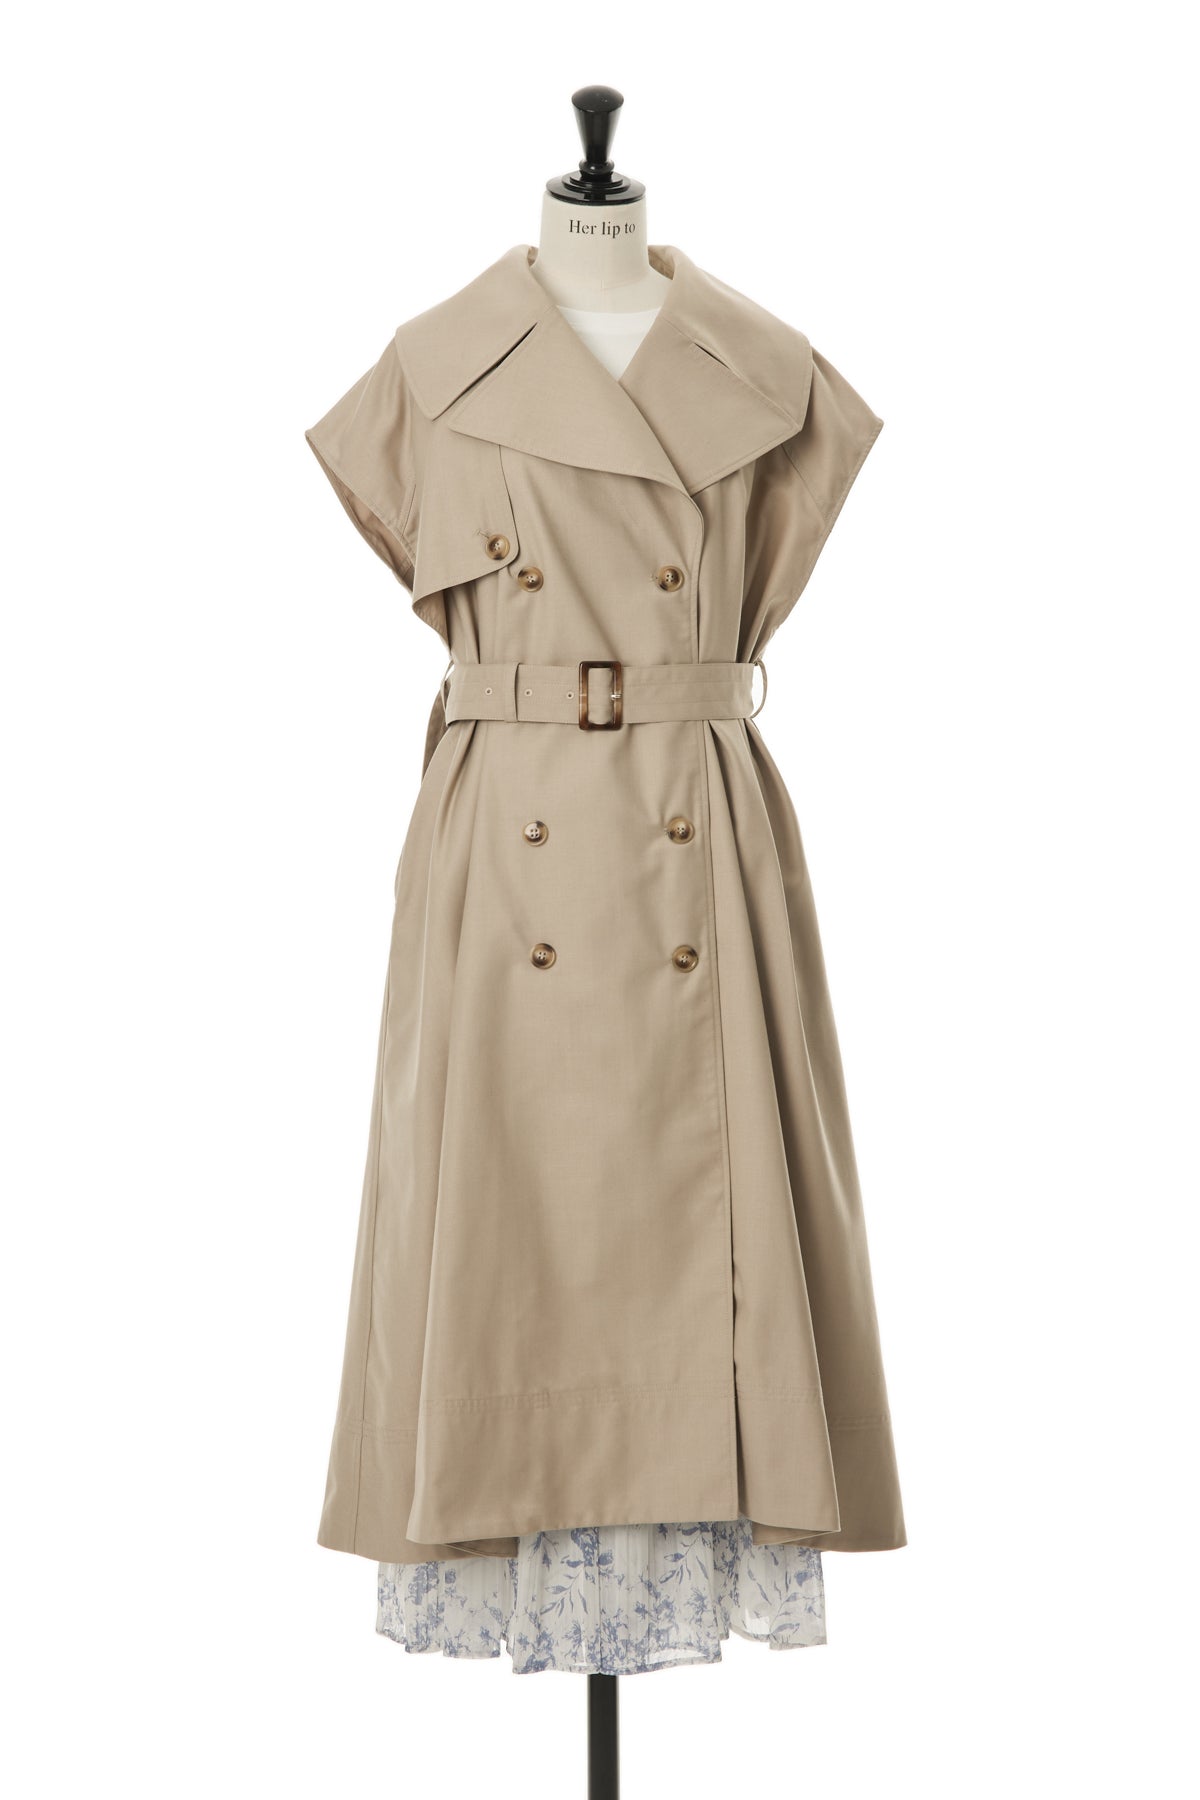 Her lip to☆Belted Dress Trench Coat - www.stedile.com.br